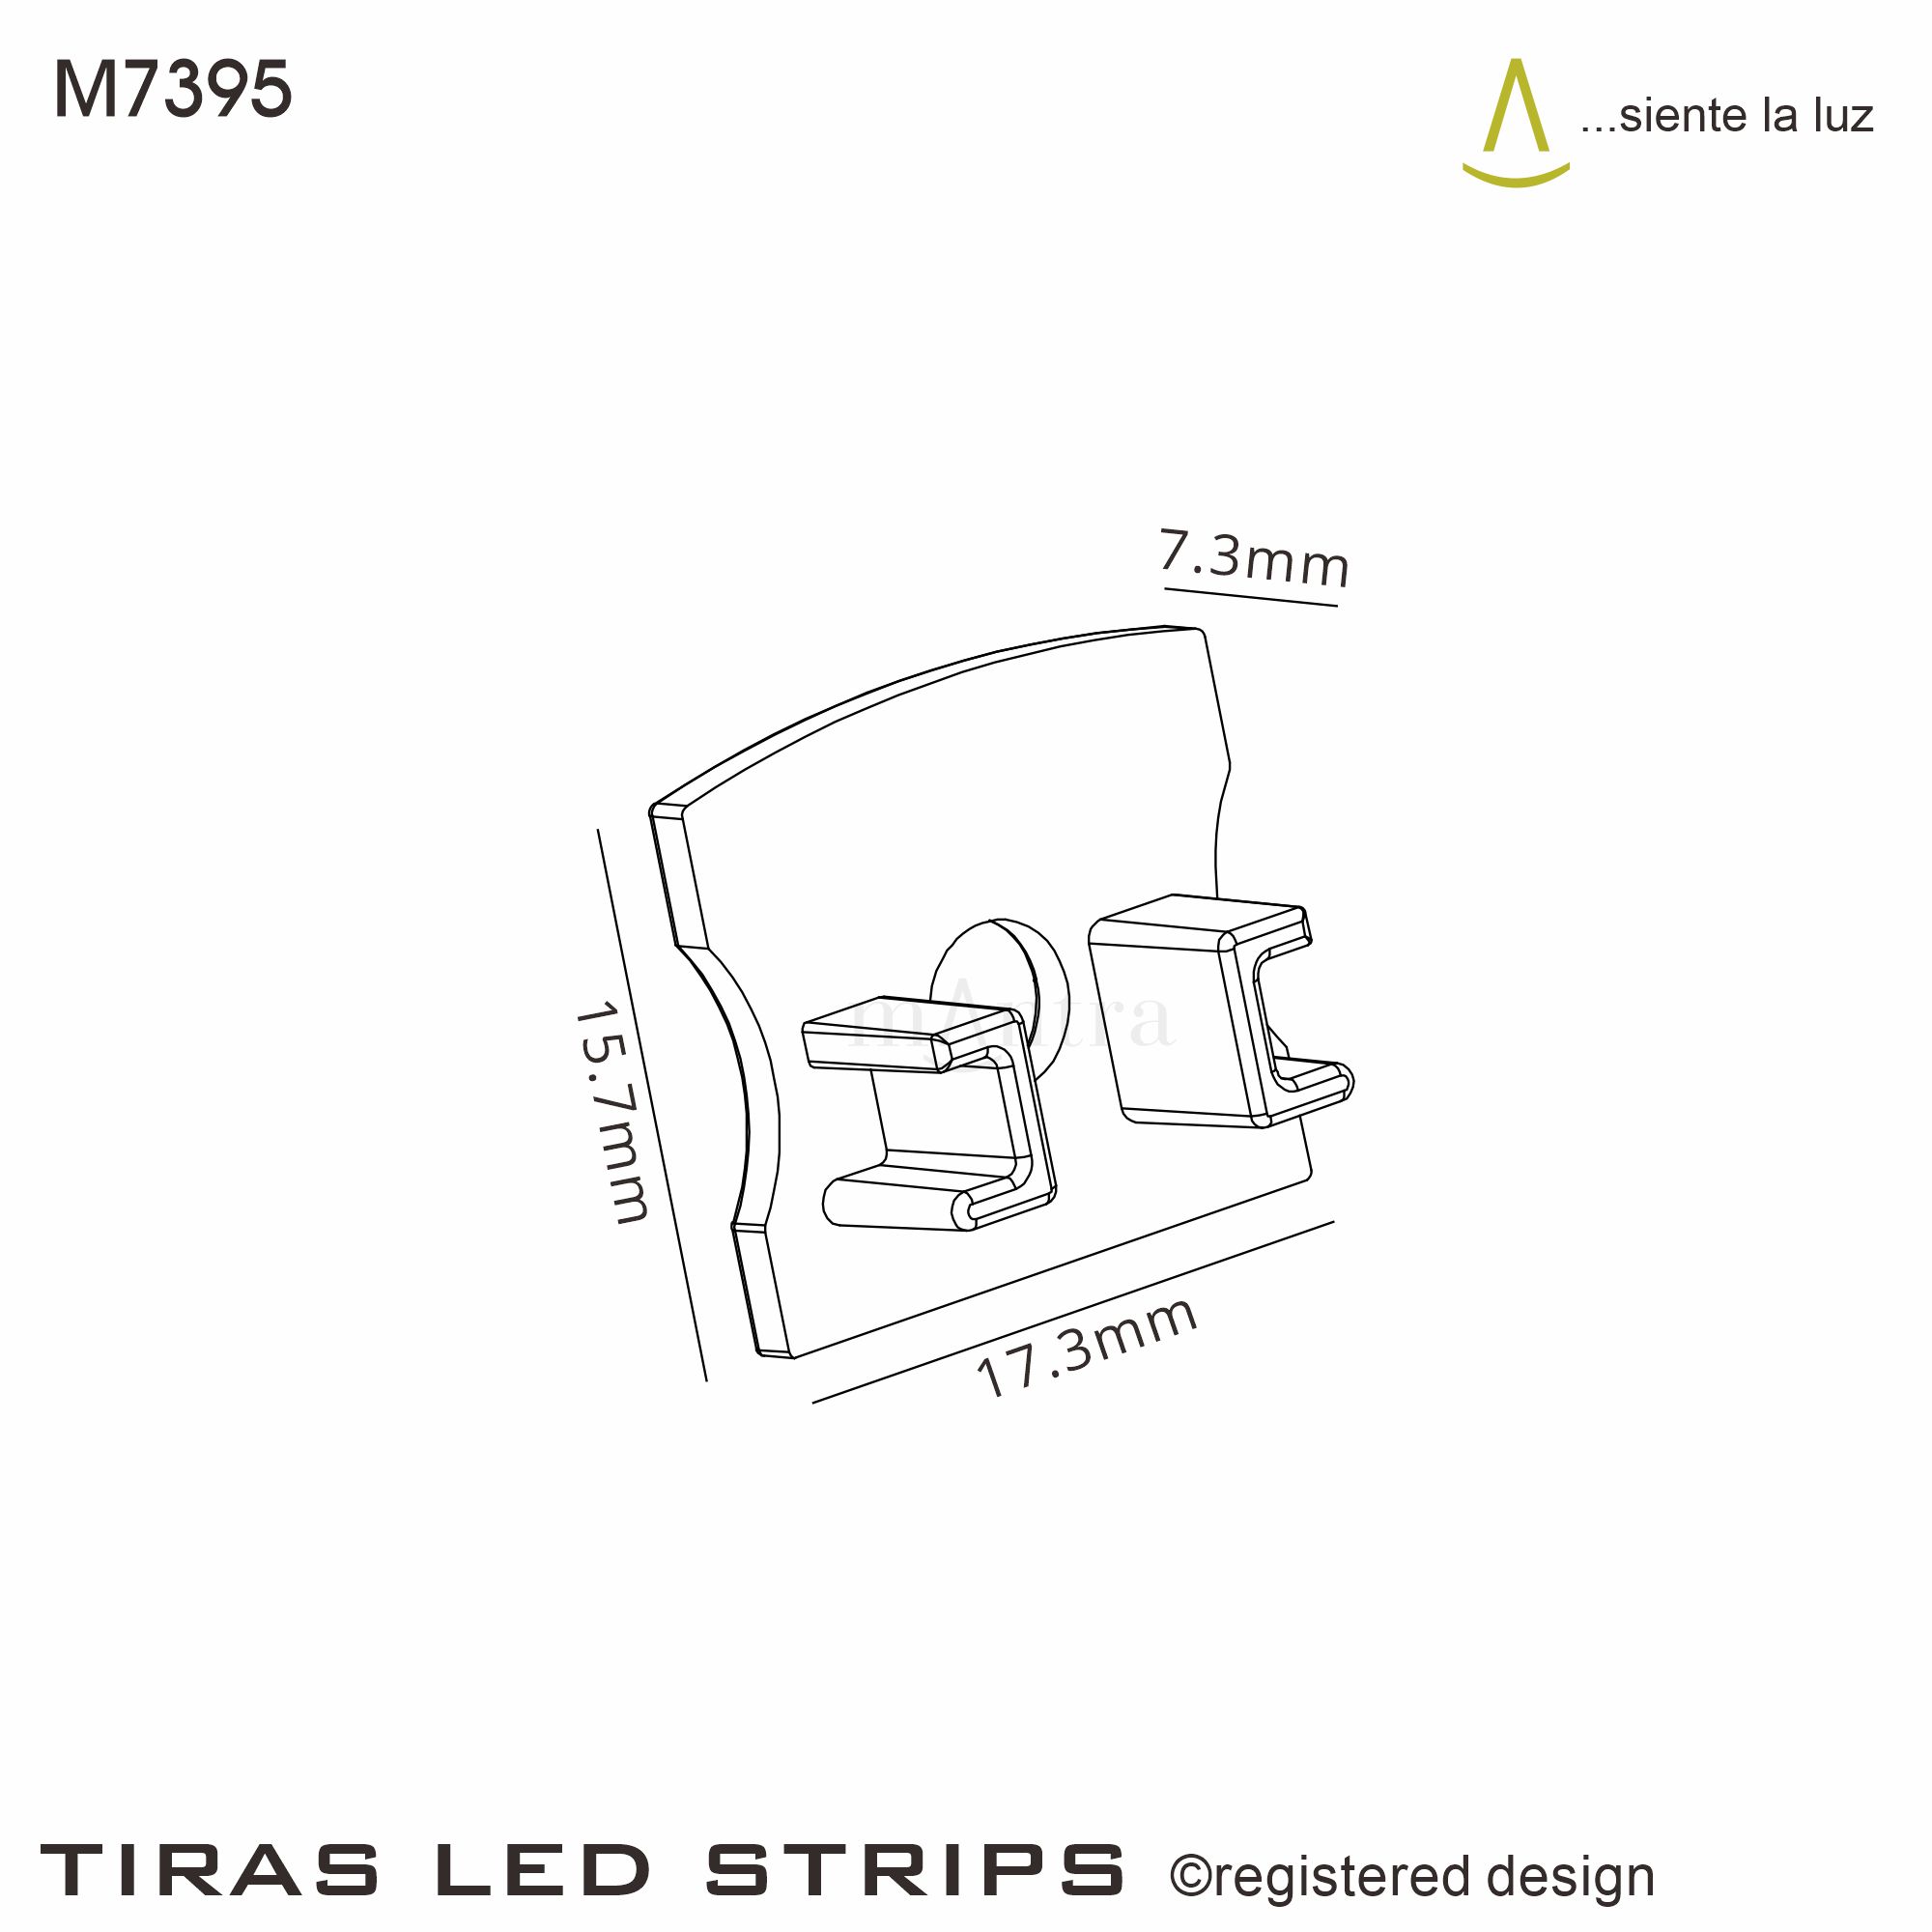 M7395  Tiras LED Strips  Profile End Cap With Hole (1pc); 17.3 x 15.7mm White